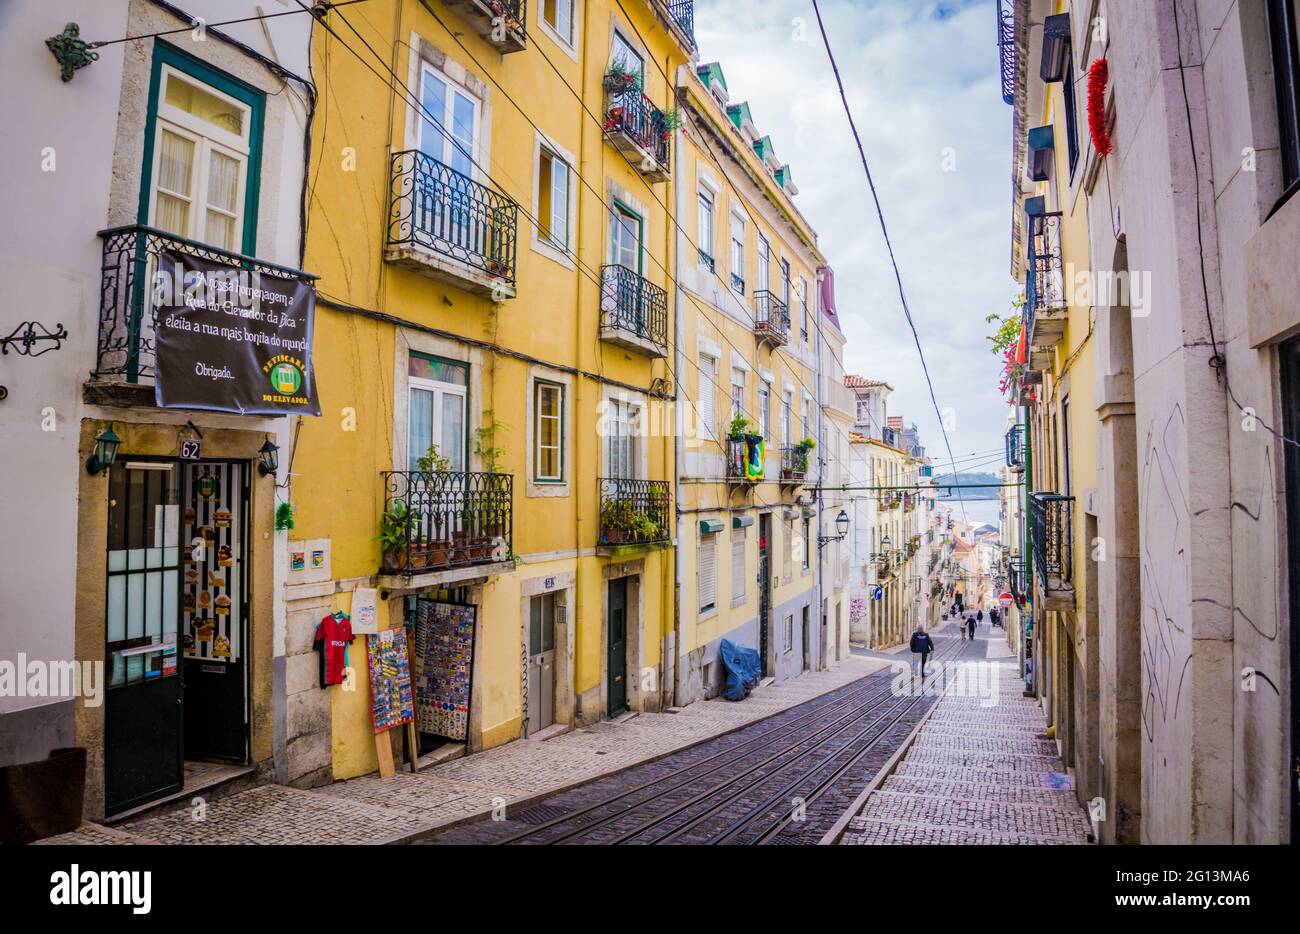 Streets of the city center of Lisbon with funicular rails. Souvenir shops, old vintage buildings with balconies, restaurants. Portugal Stock Photo